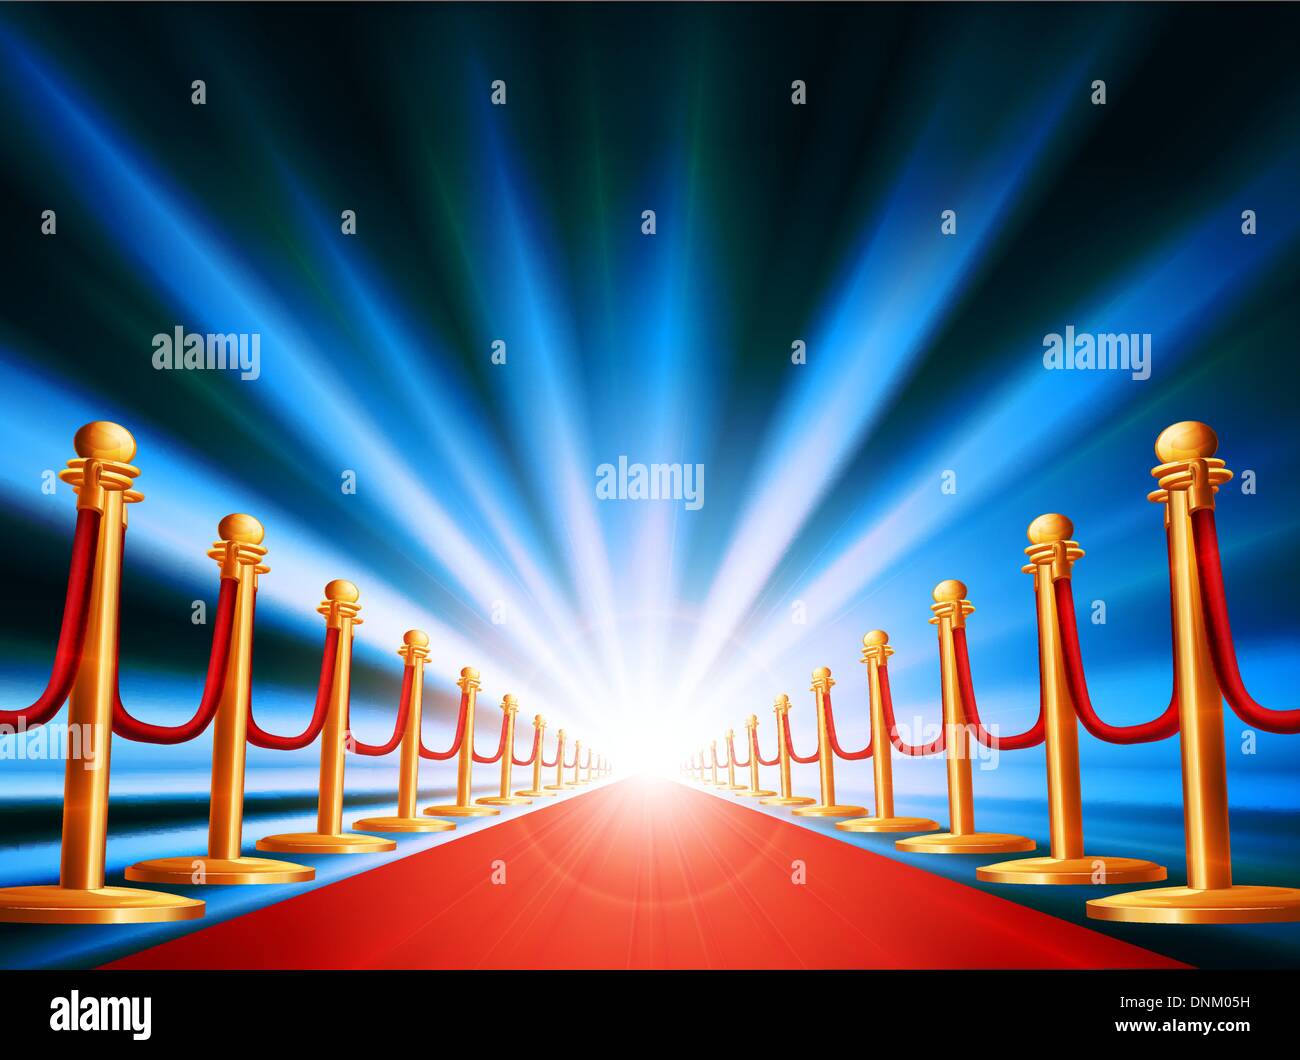 A red carpet leading to somewhere exciting with bright light and abstract background Stock Vector